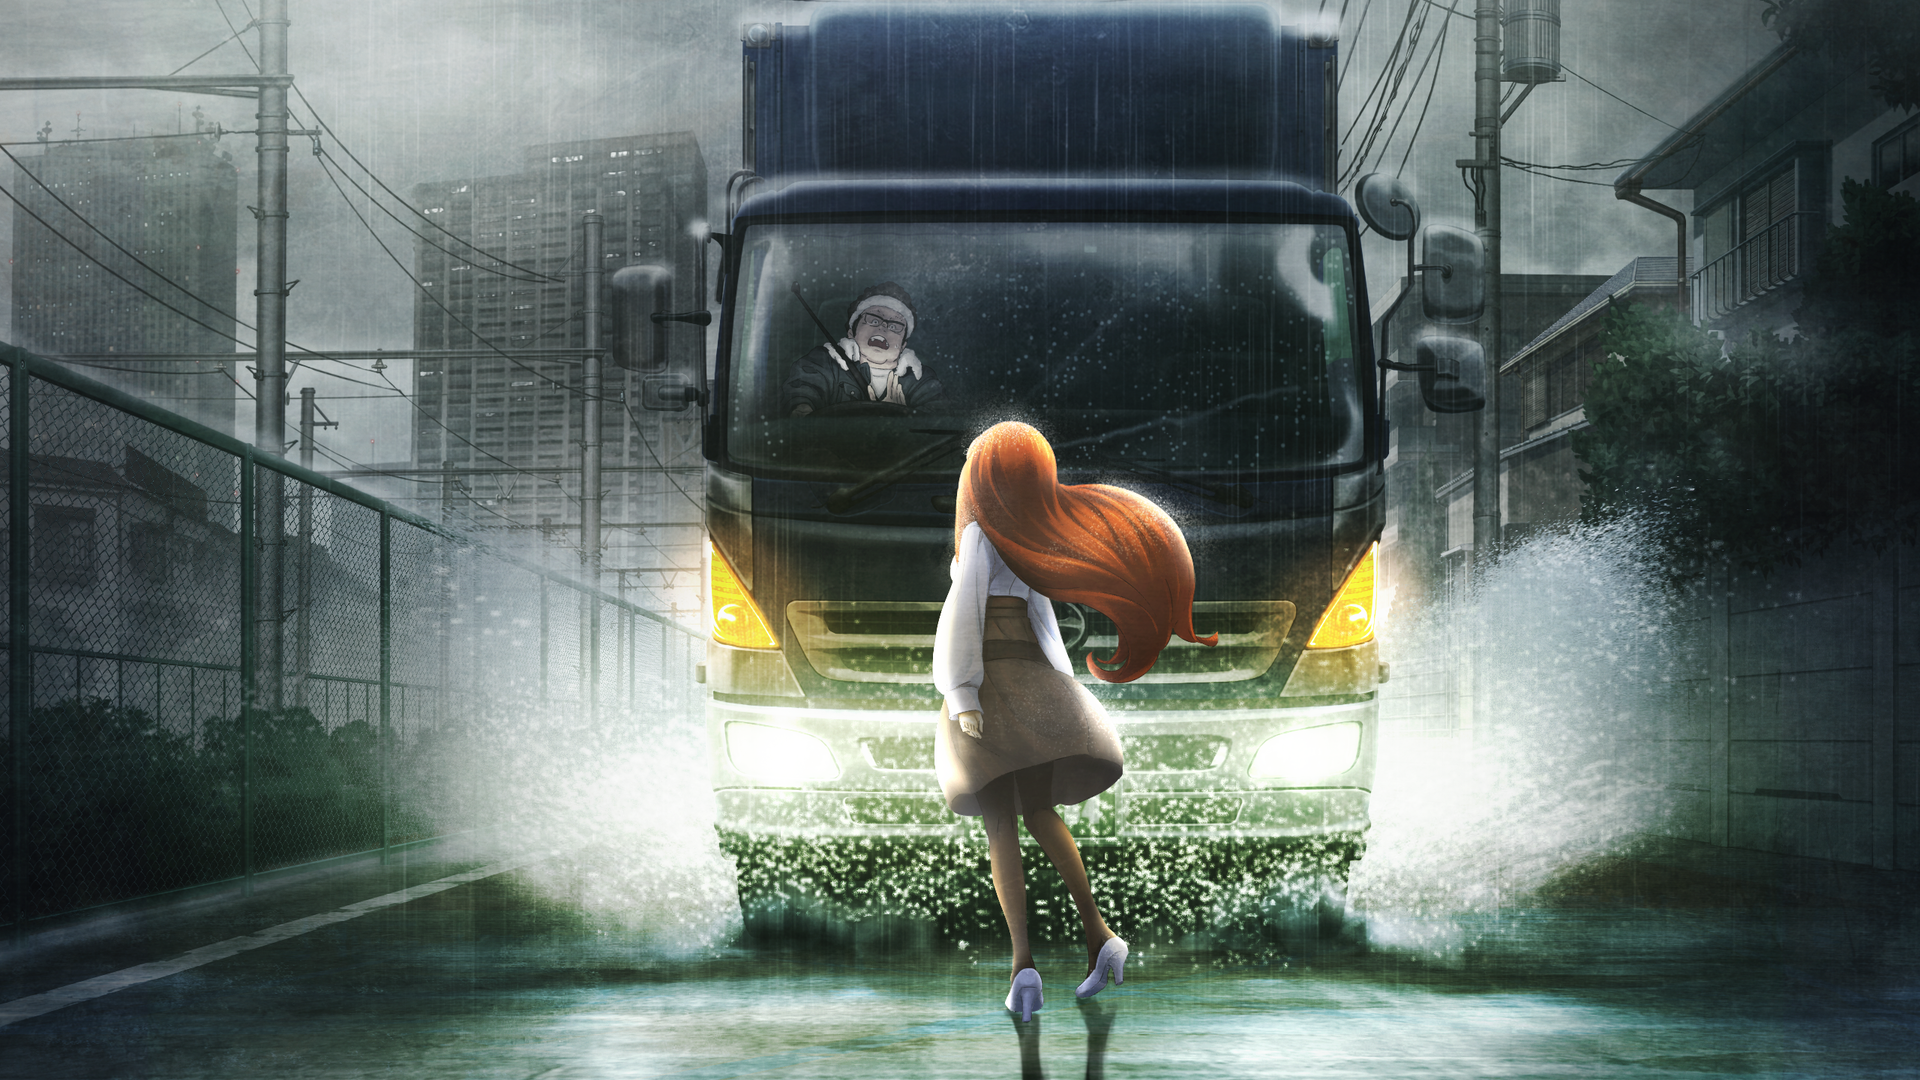 70 Anime Steins Gate 0 Hd Wallpapers And Backgrounds